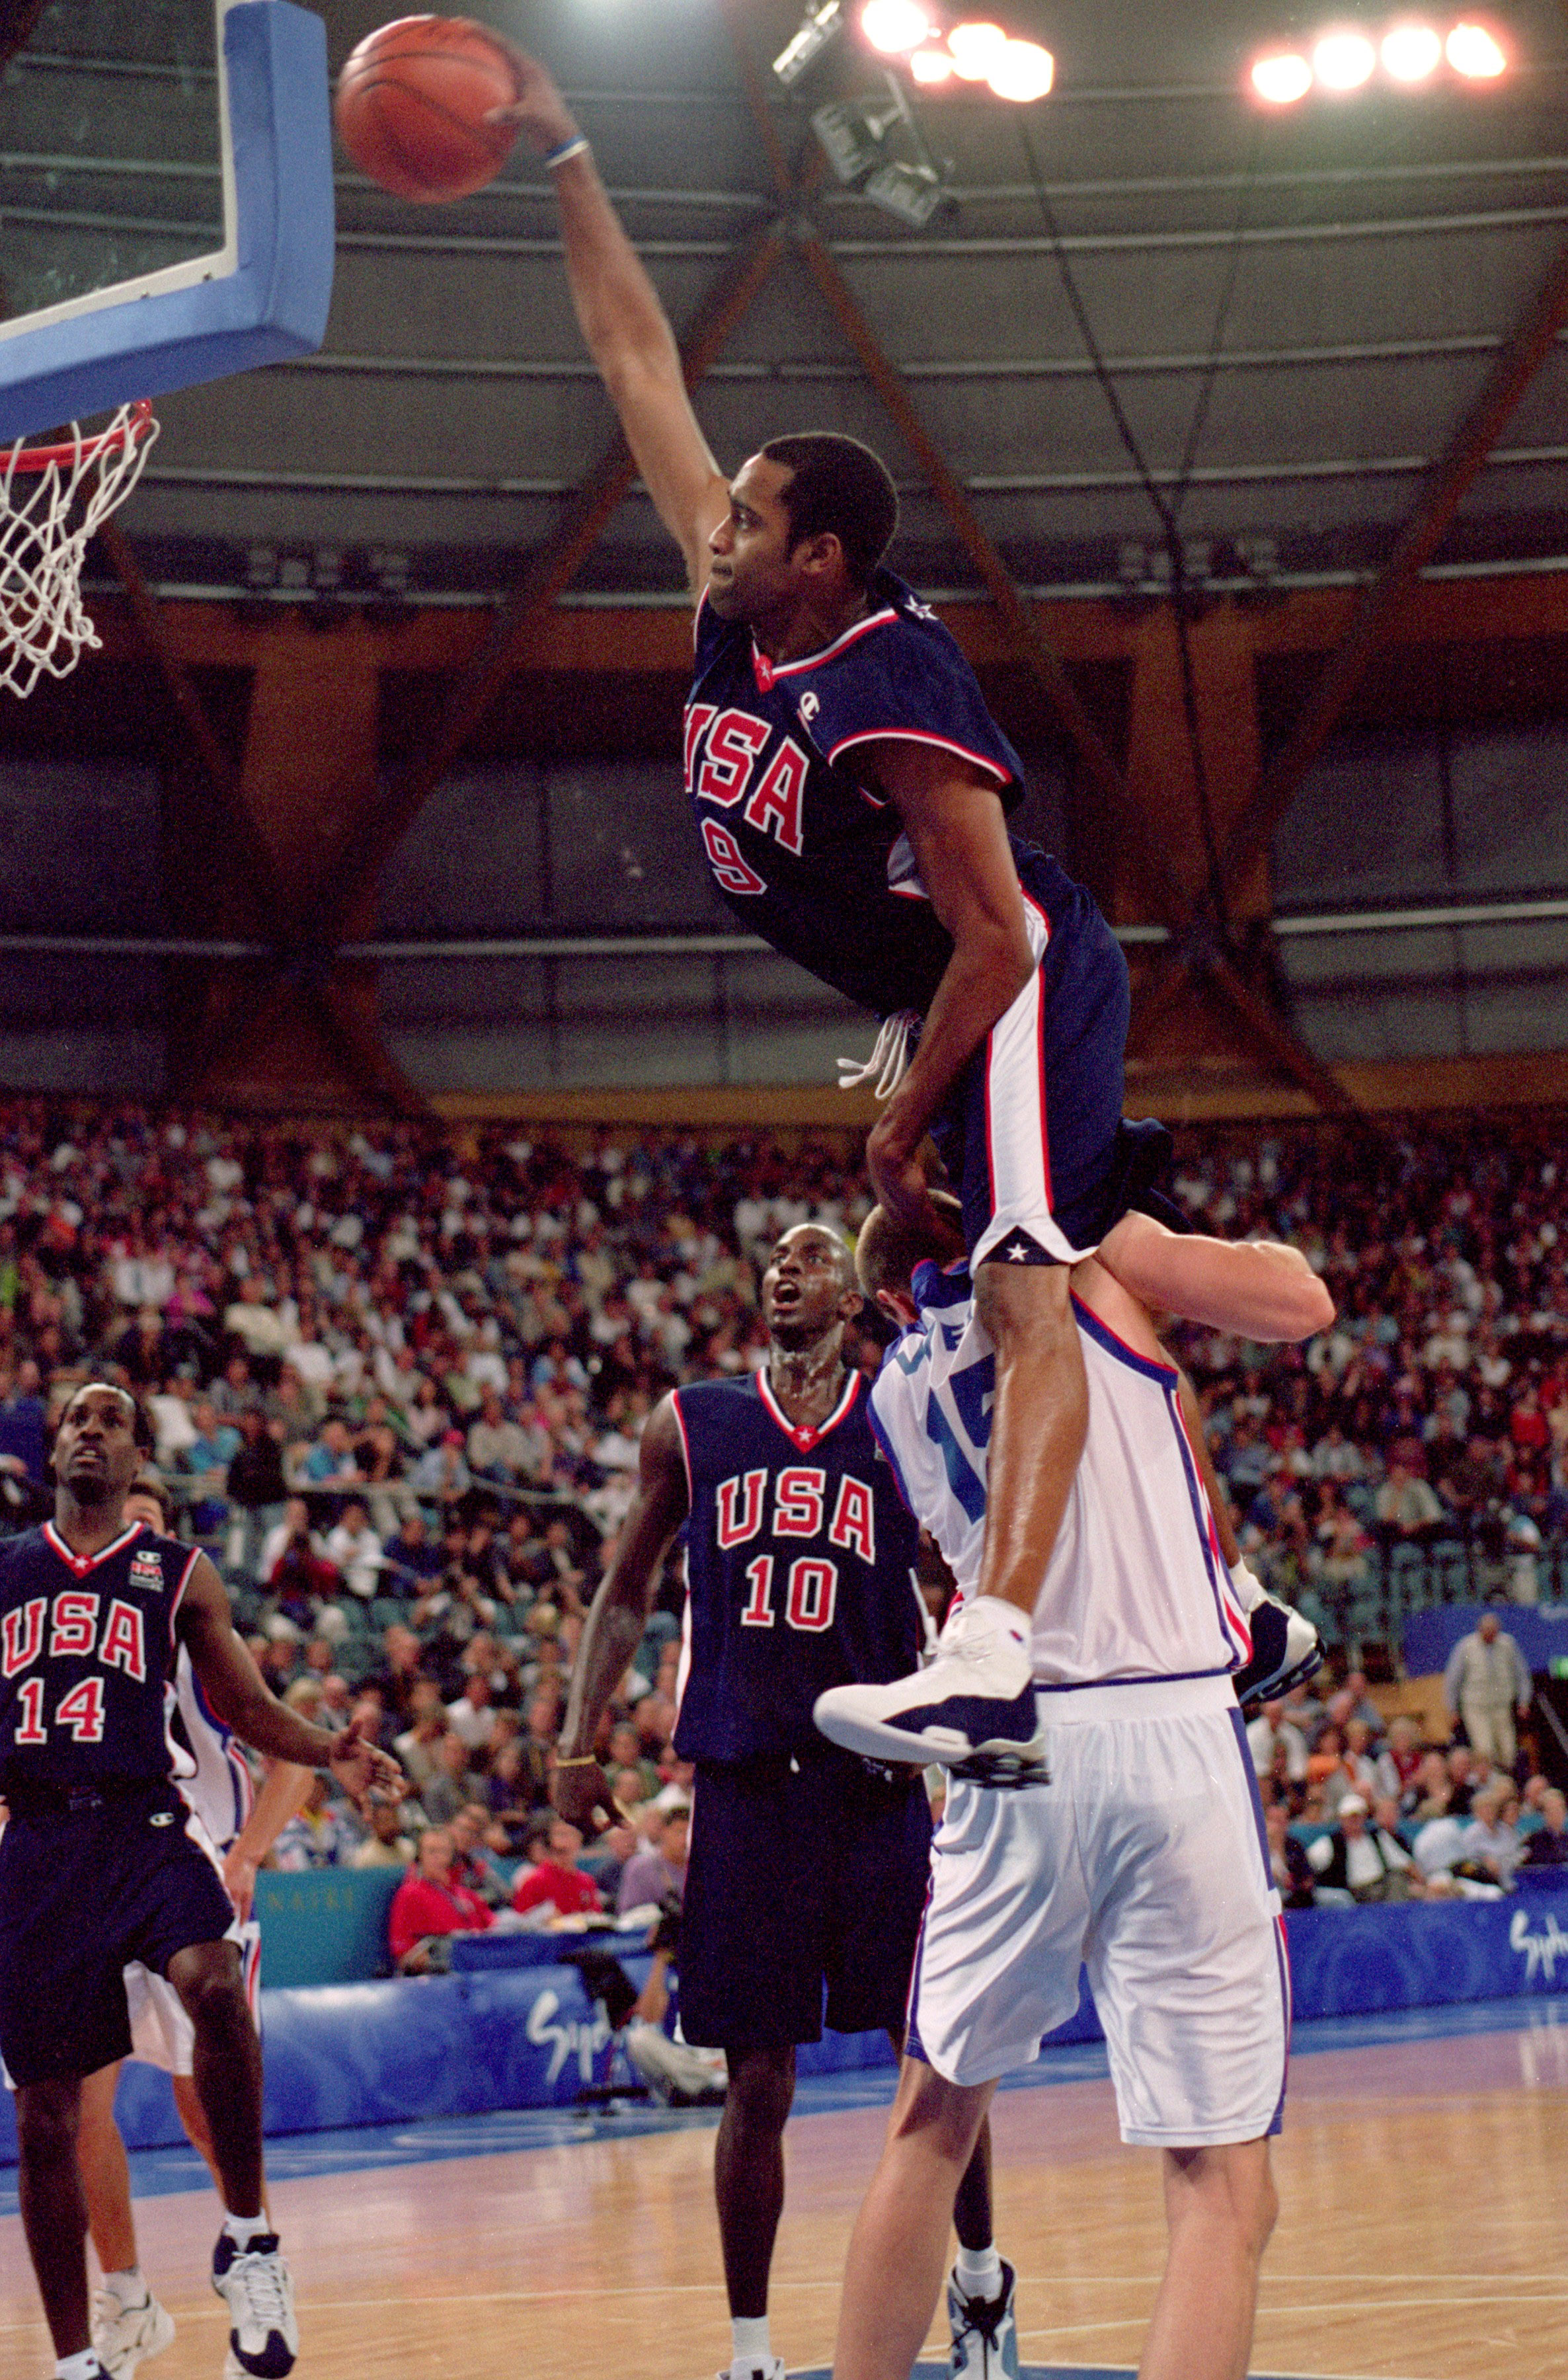 Vince Carter Looks Back At The 2000 Slam Dunk Contest (Thank You